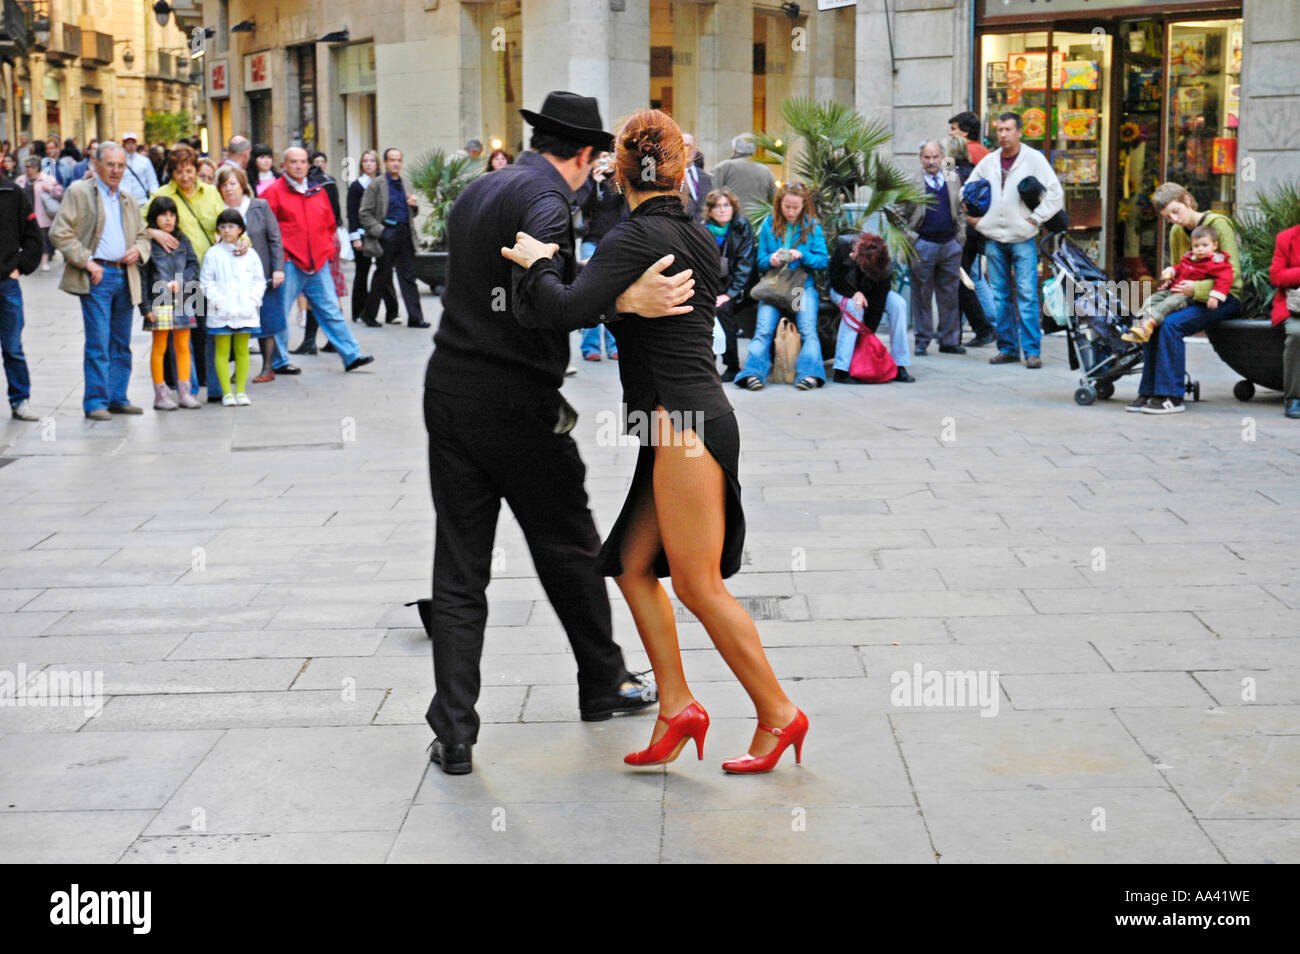 Couple dancing Tange in the street in front of an audience, gothic quarter, Barcelona, Catalonia, Spain Stock Photo